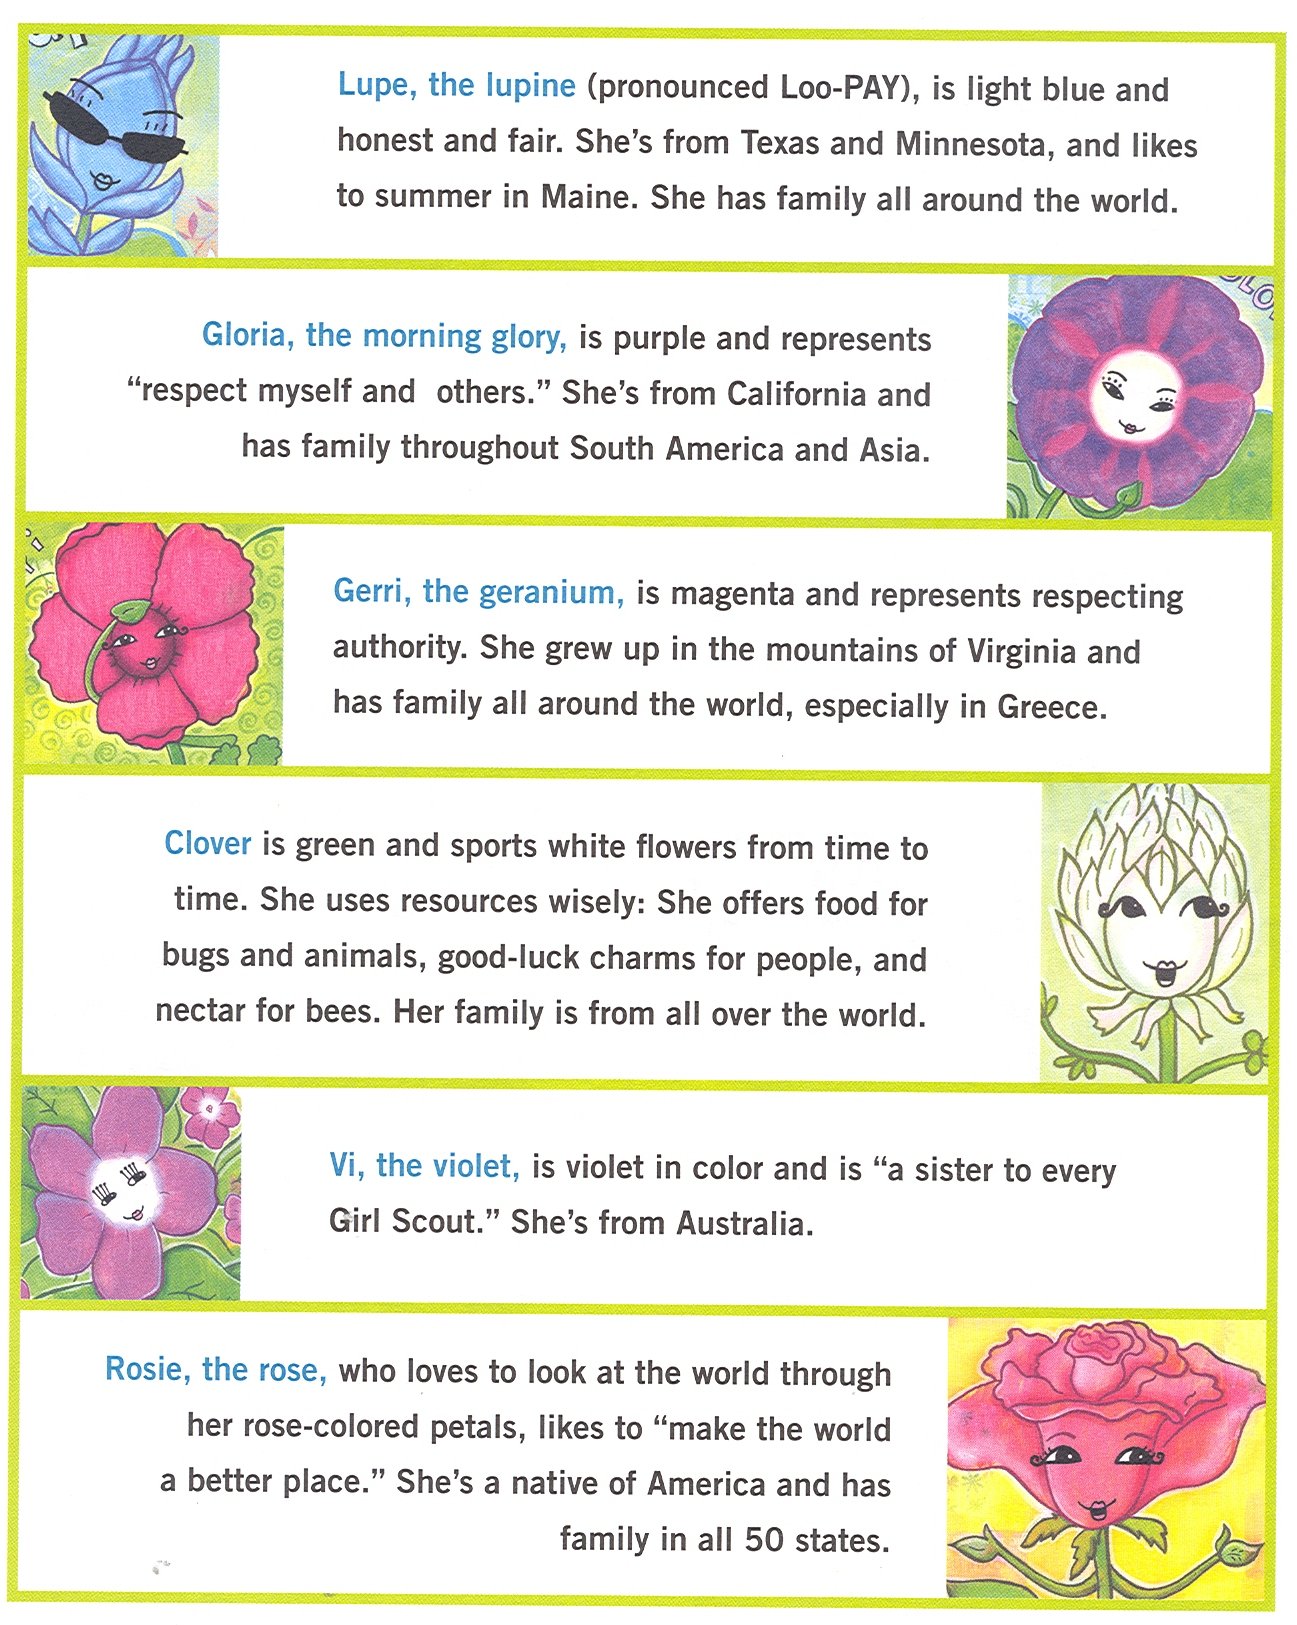 6 of Amazing Daisy's Flower Friends. Each one is represented in the ...